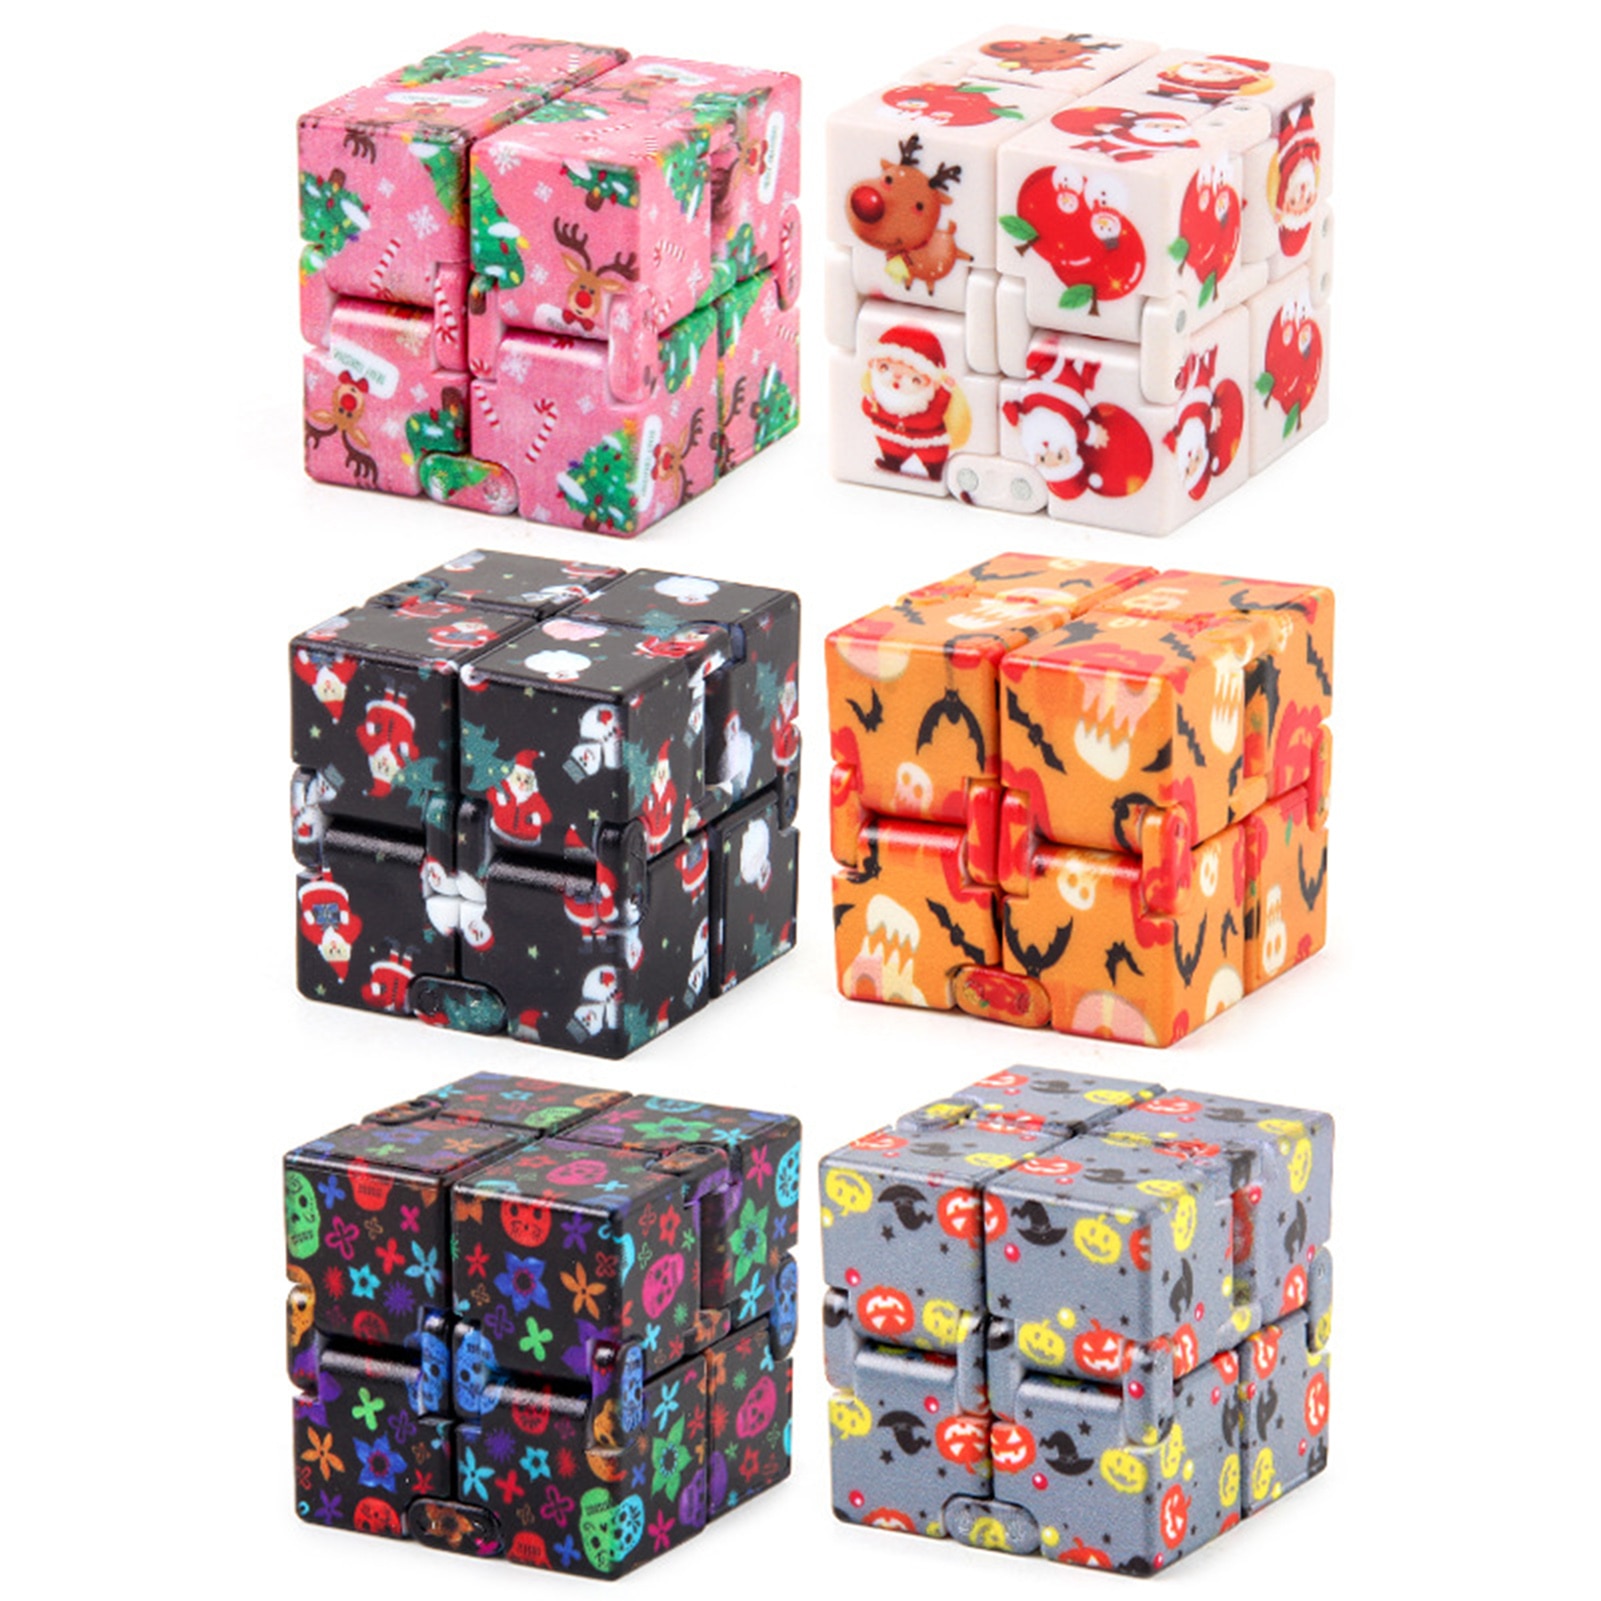 Details about   Magic Infinity Cube Stress Fidget Sensory Toys Autism Anxiety Child Kids Gift 